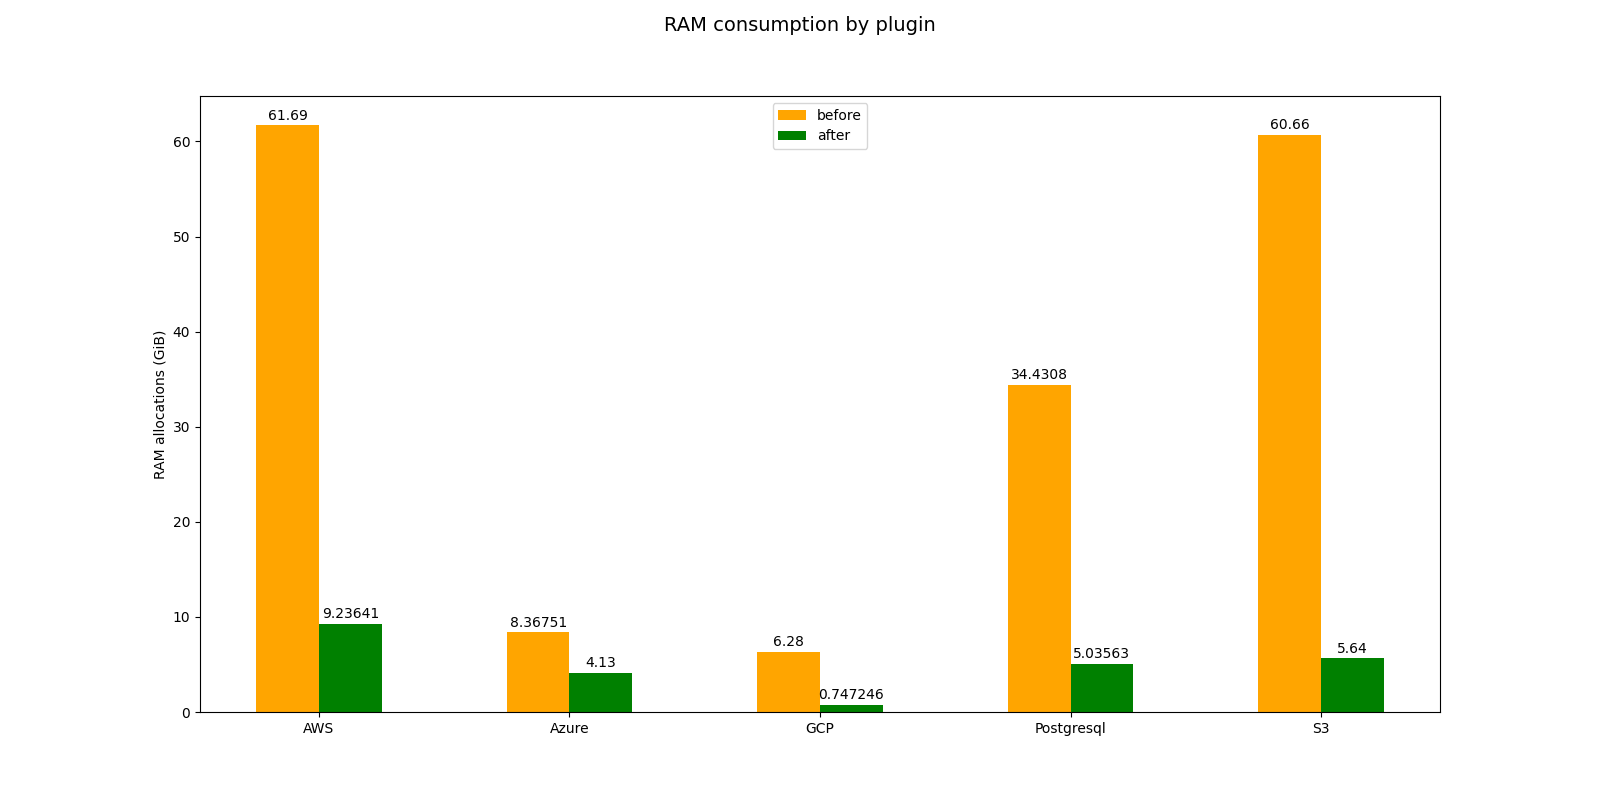 Bar chart comparing RAM consumption by plugin for AWS, Azure, GCP, PostgreSQL, and S3 before and after a specific update. Each plugin shows a significant reduction in RAM allocations in the 'after' version.